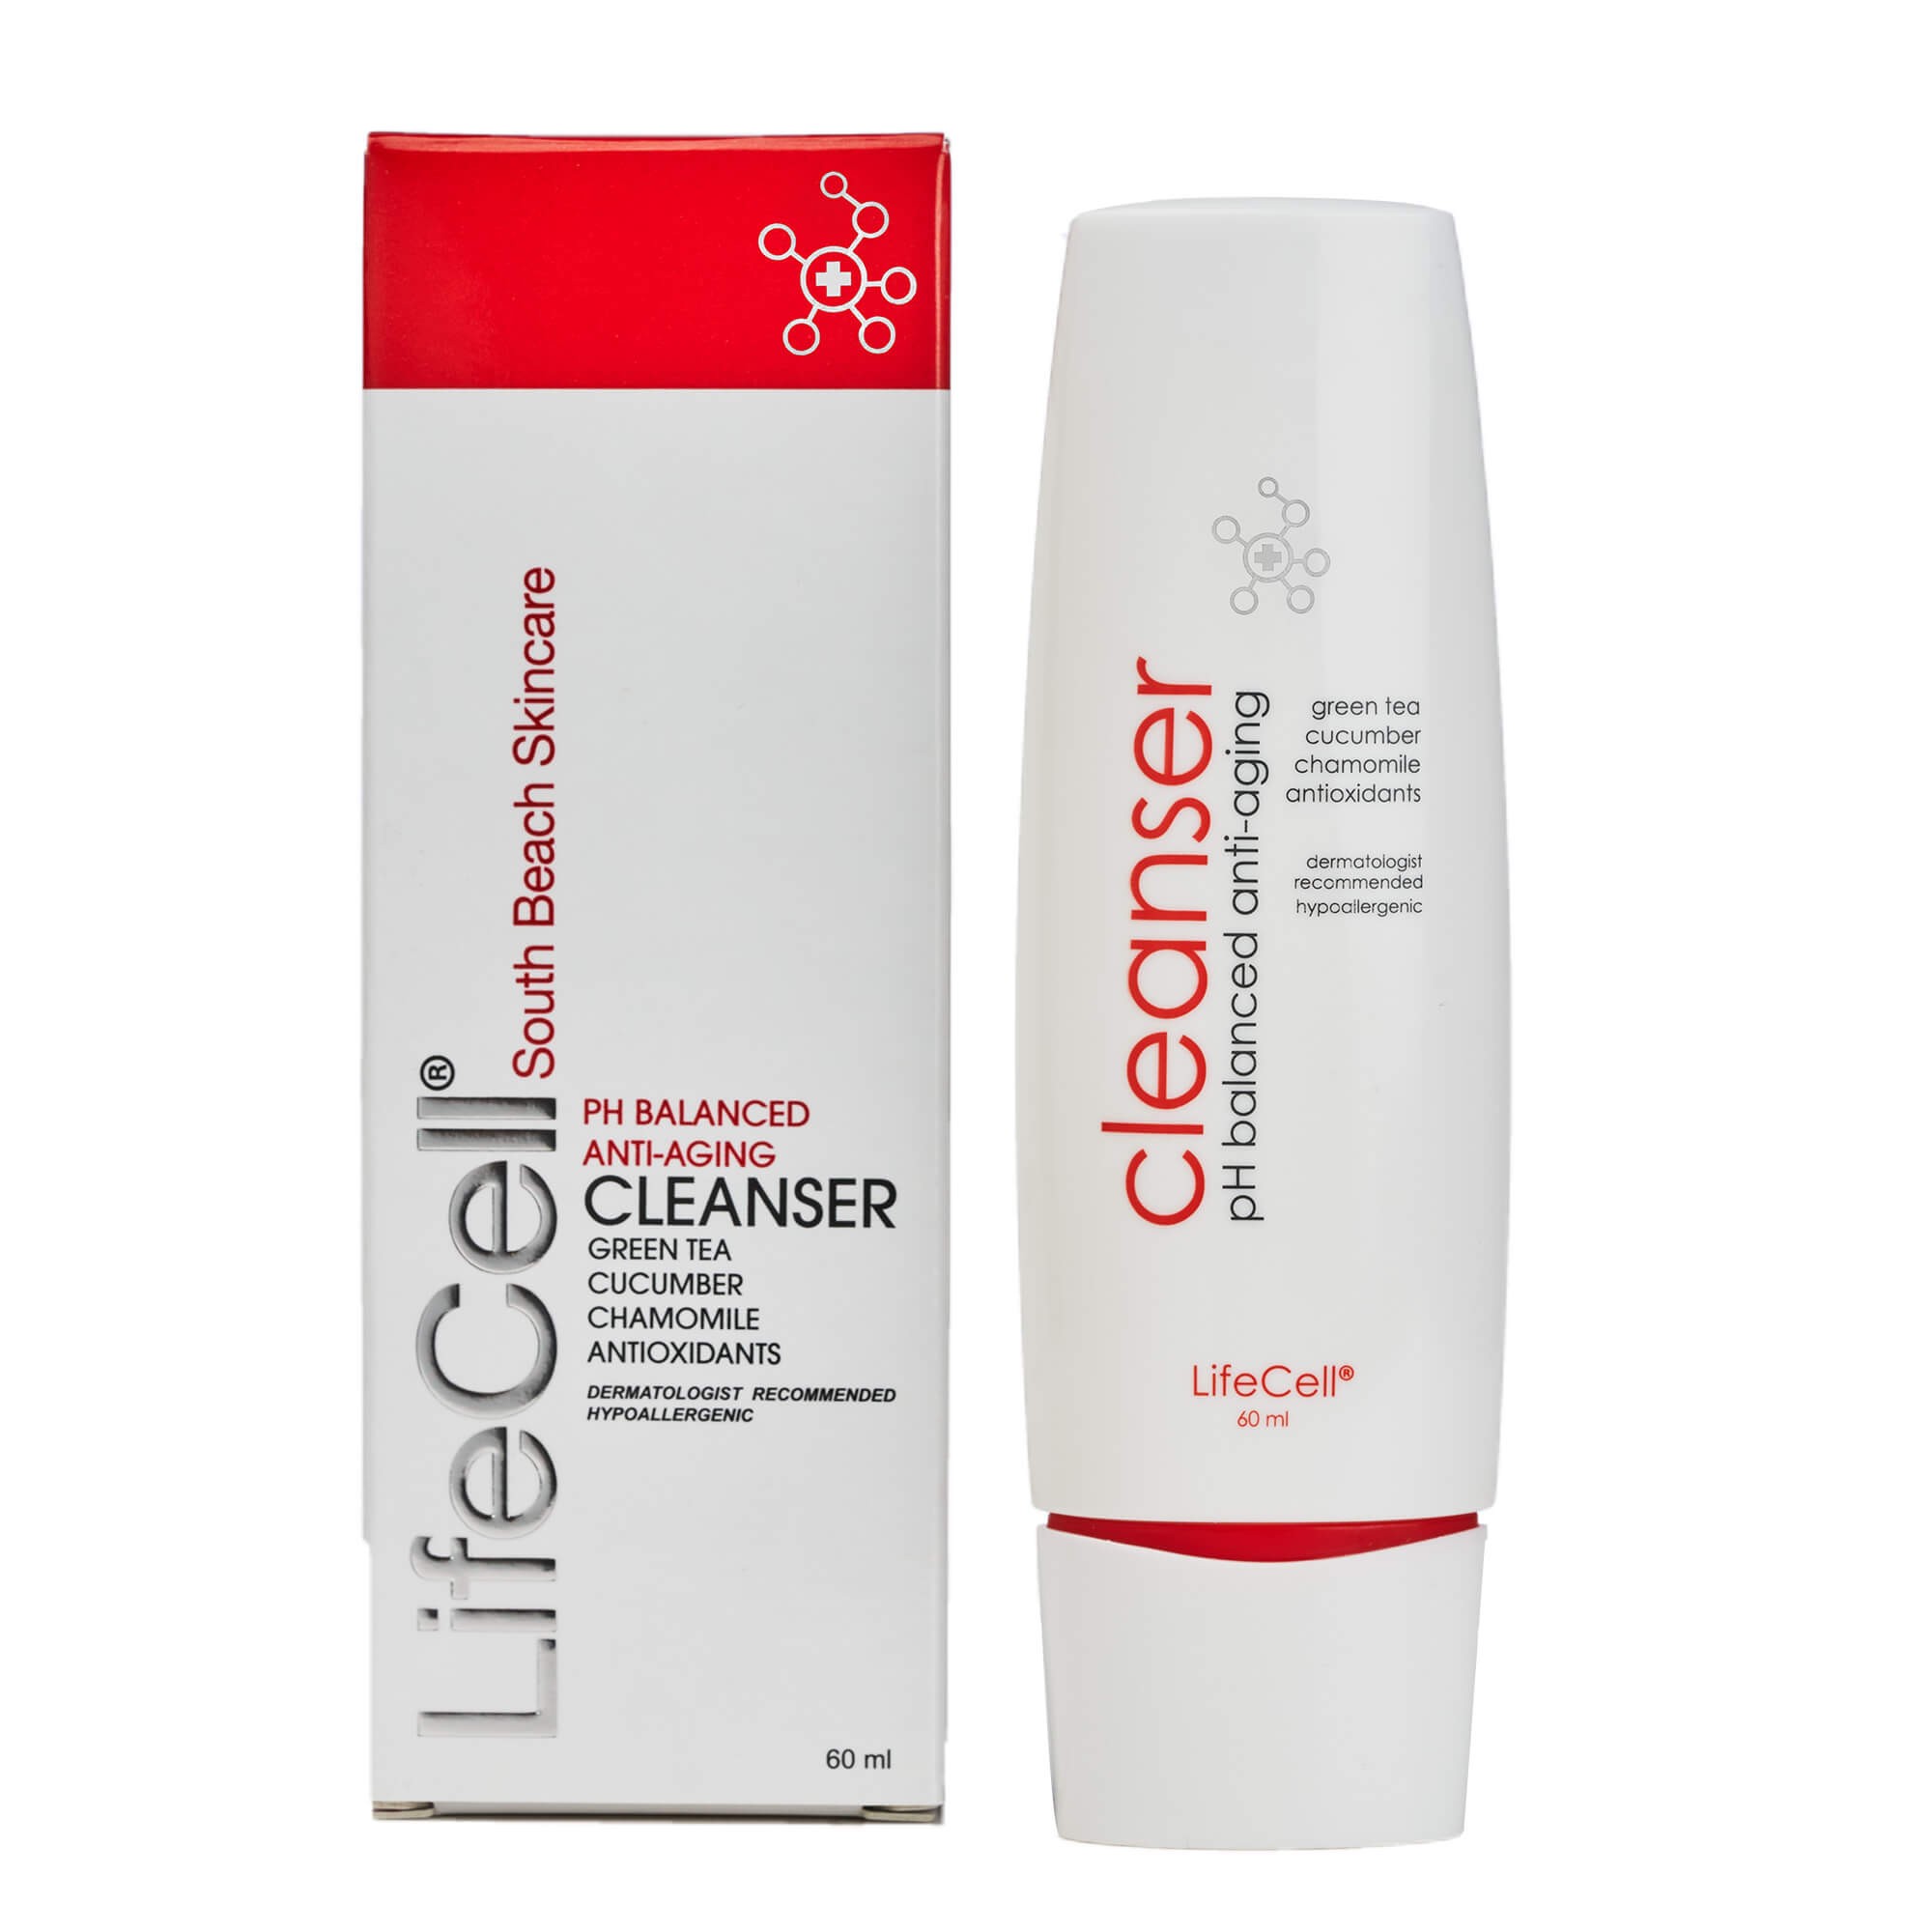 lifecell cleanser